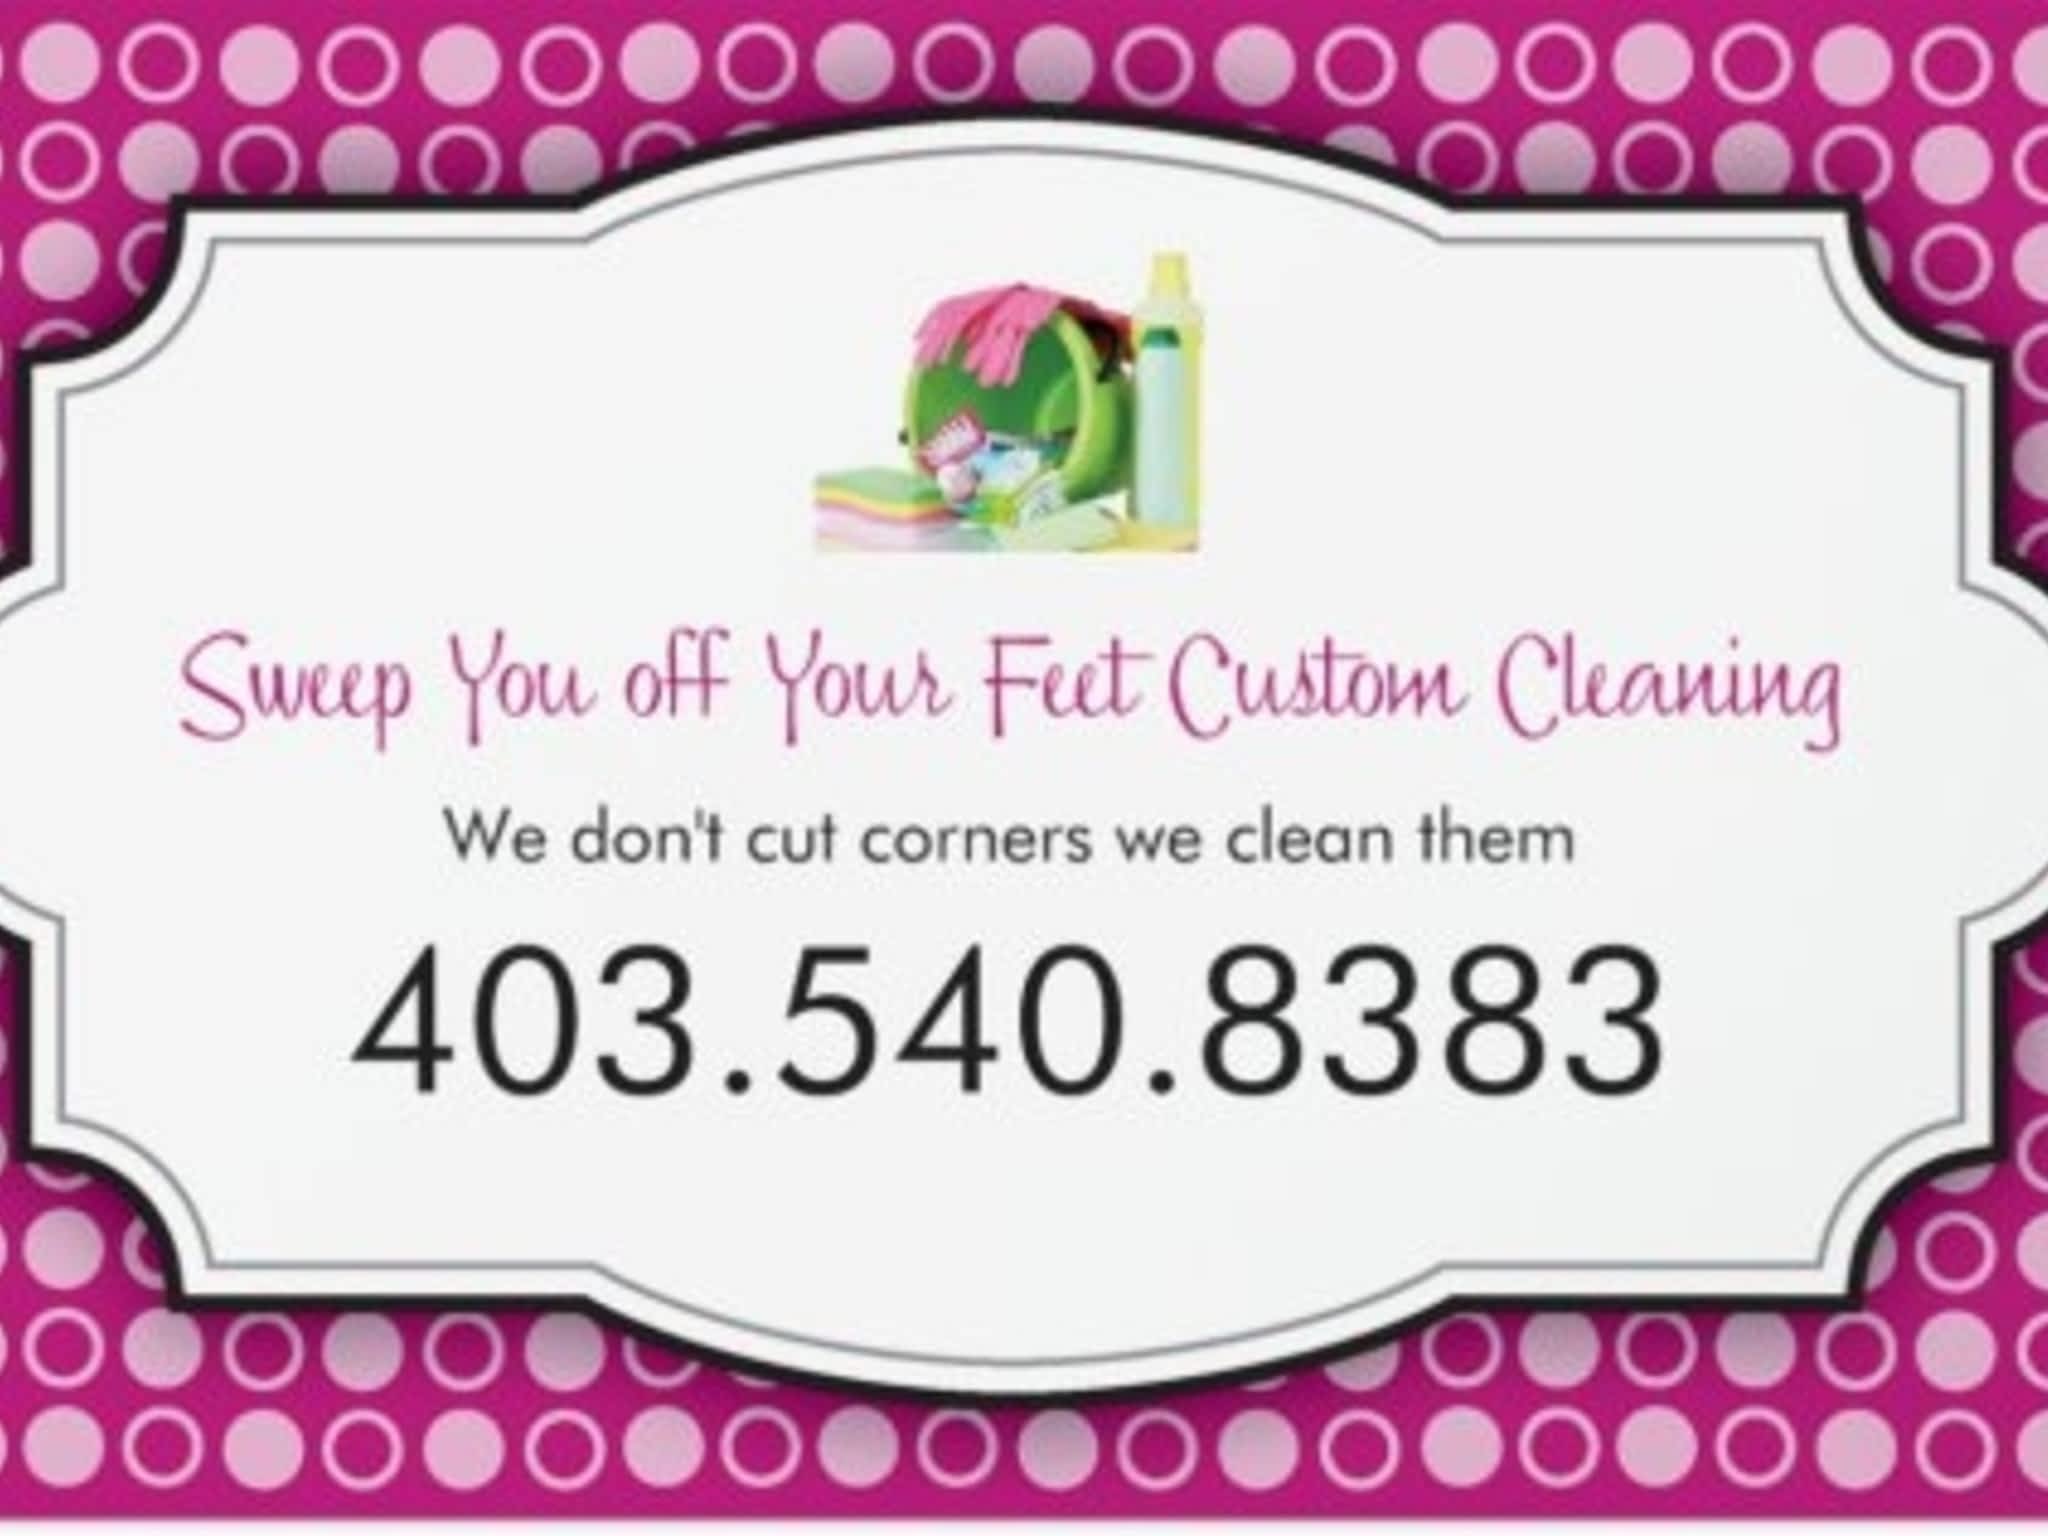 photo Sweep You Off Your Feet Custom Cleaning